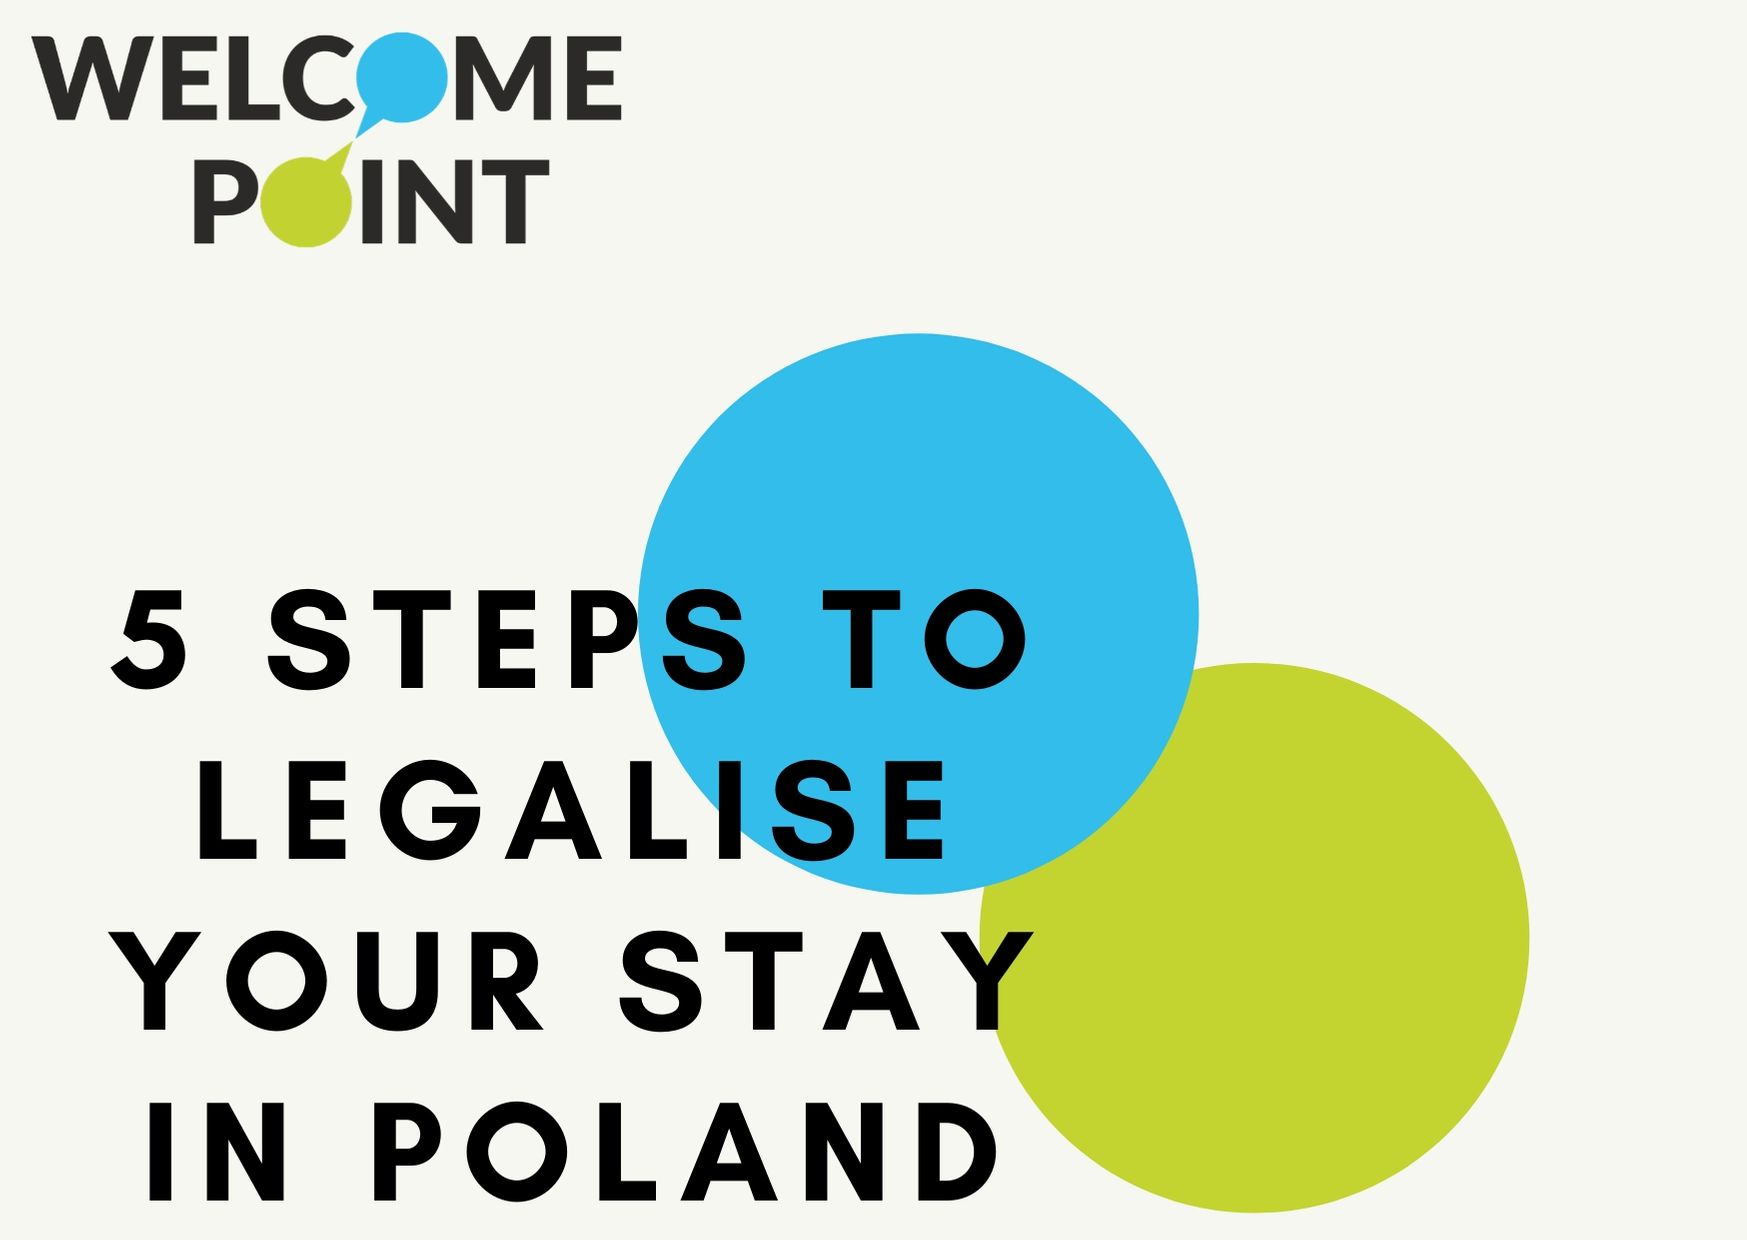 5 steps to legalise your stay in Poland